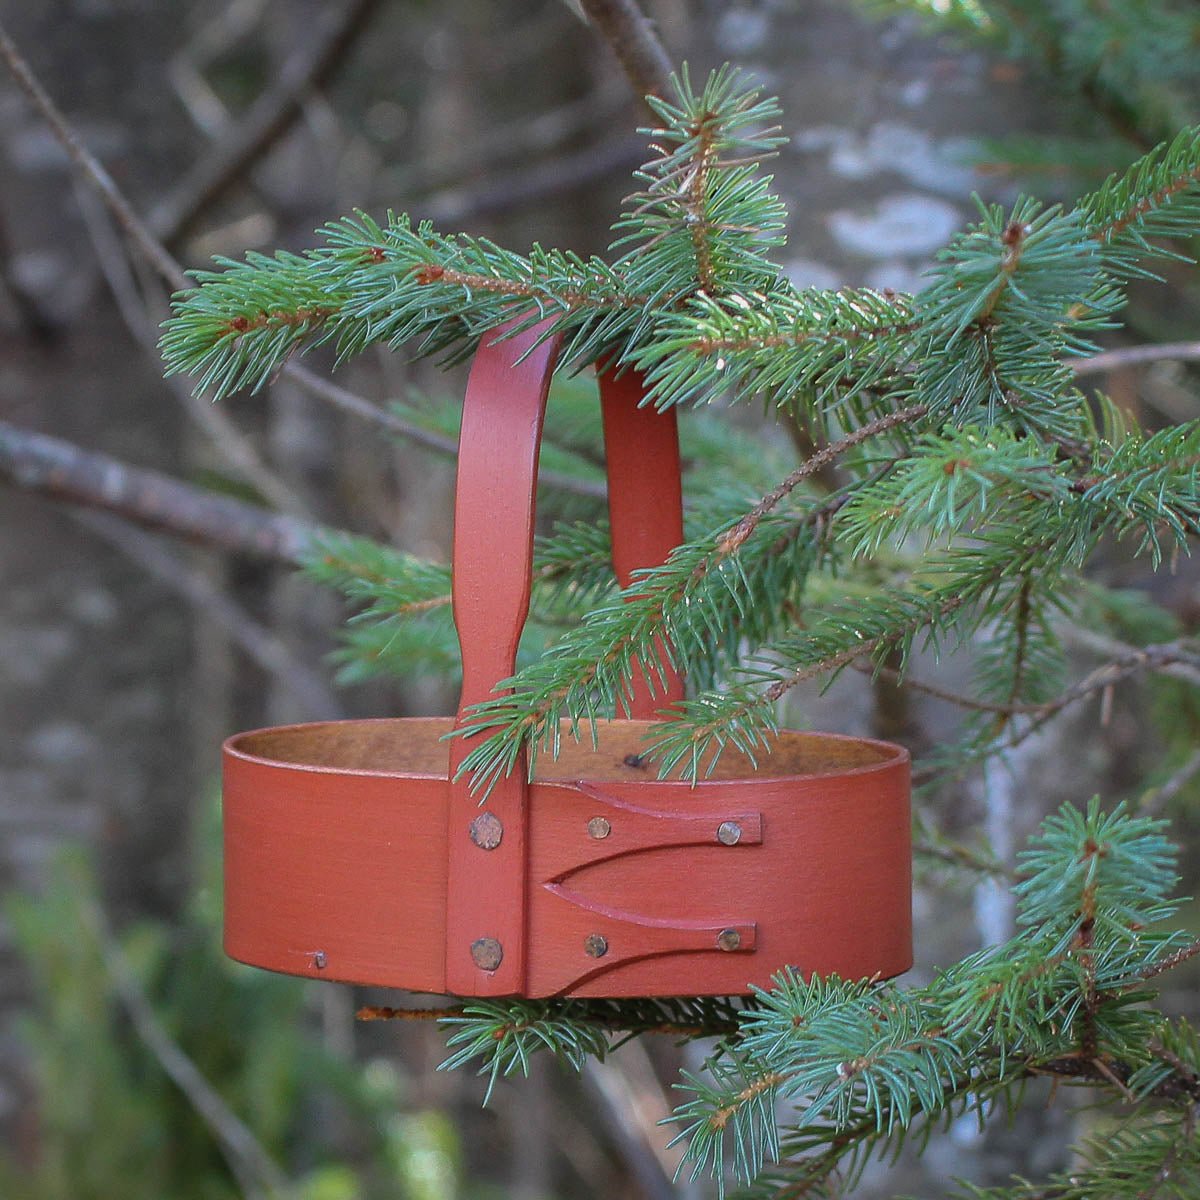 Shaker Carrier, Size #0, LeHays Shaker Boxes, Handcrafted in Maine.  Red Milk Paint Finish, Hanging on Christmas Tree